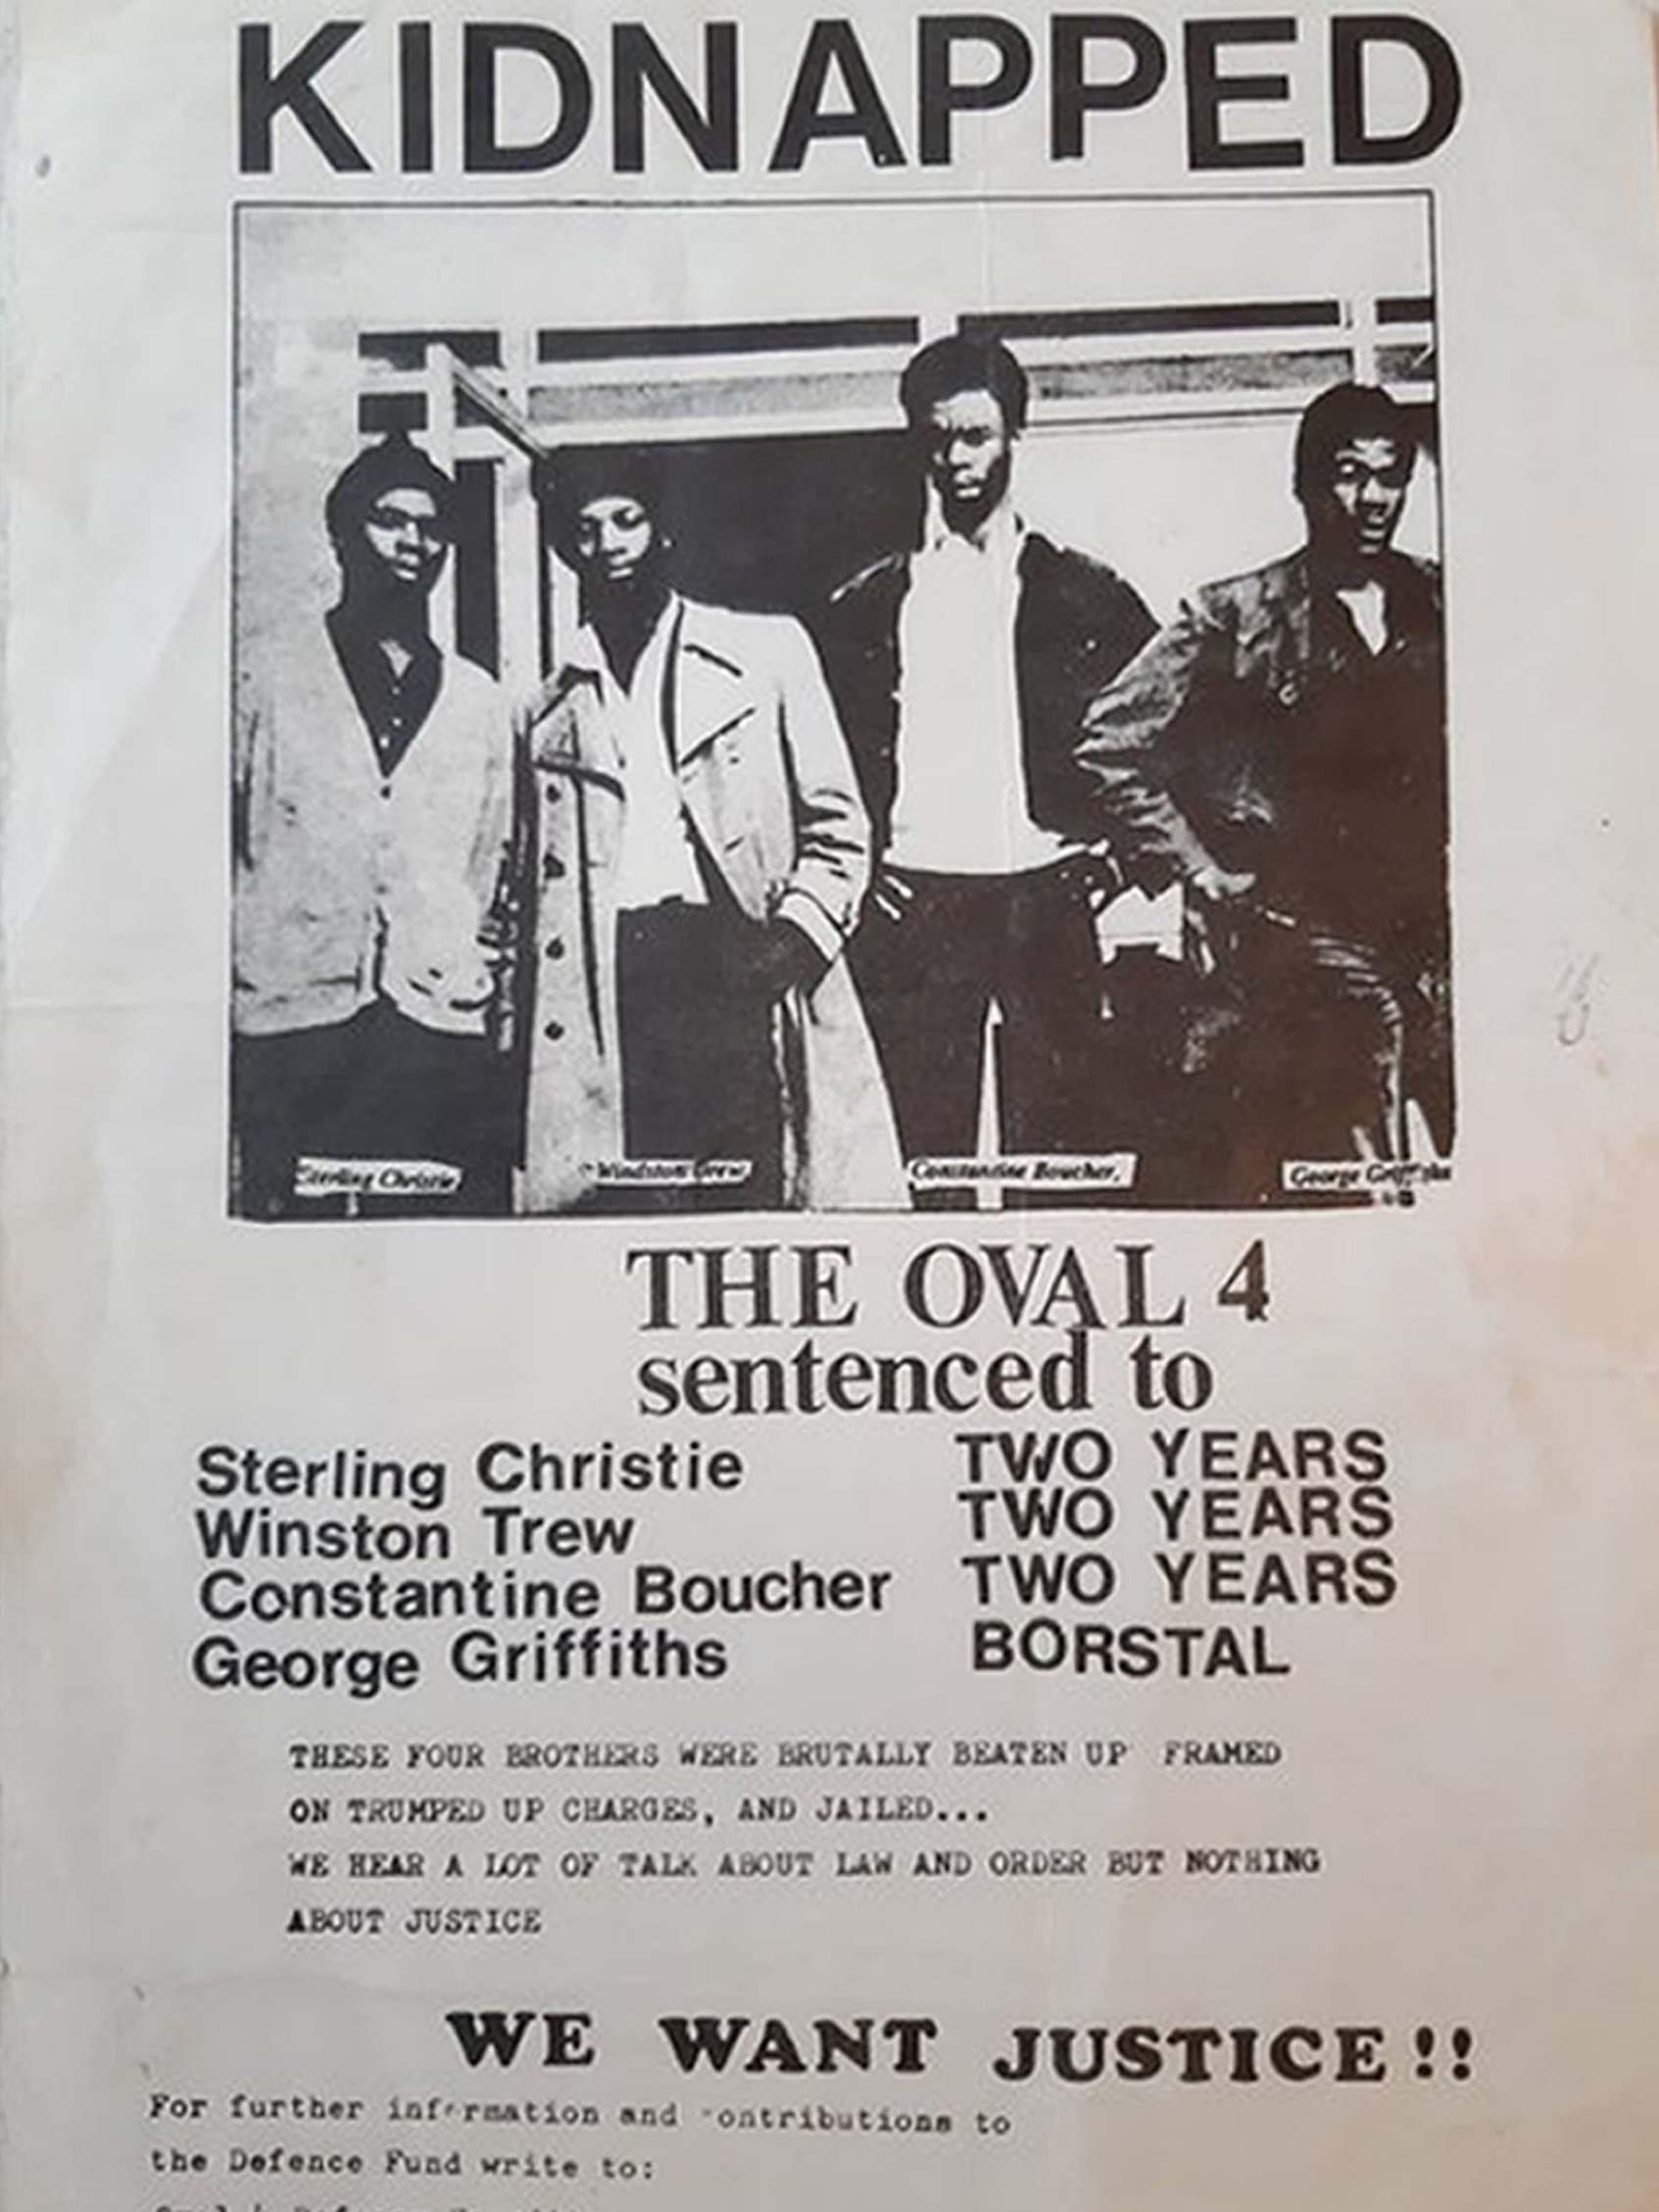 A poster calling for justice for Winston Trew, Sterling Christie and George Griffiths who served jail terms for a mugging in the 1970s